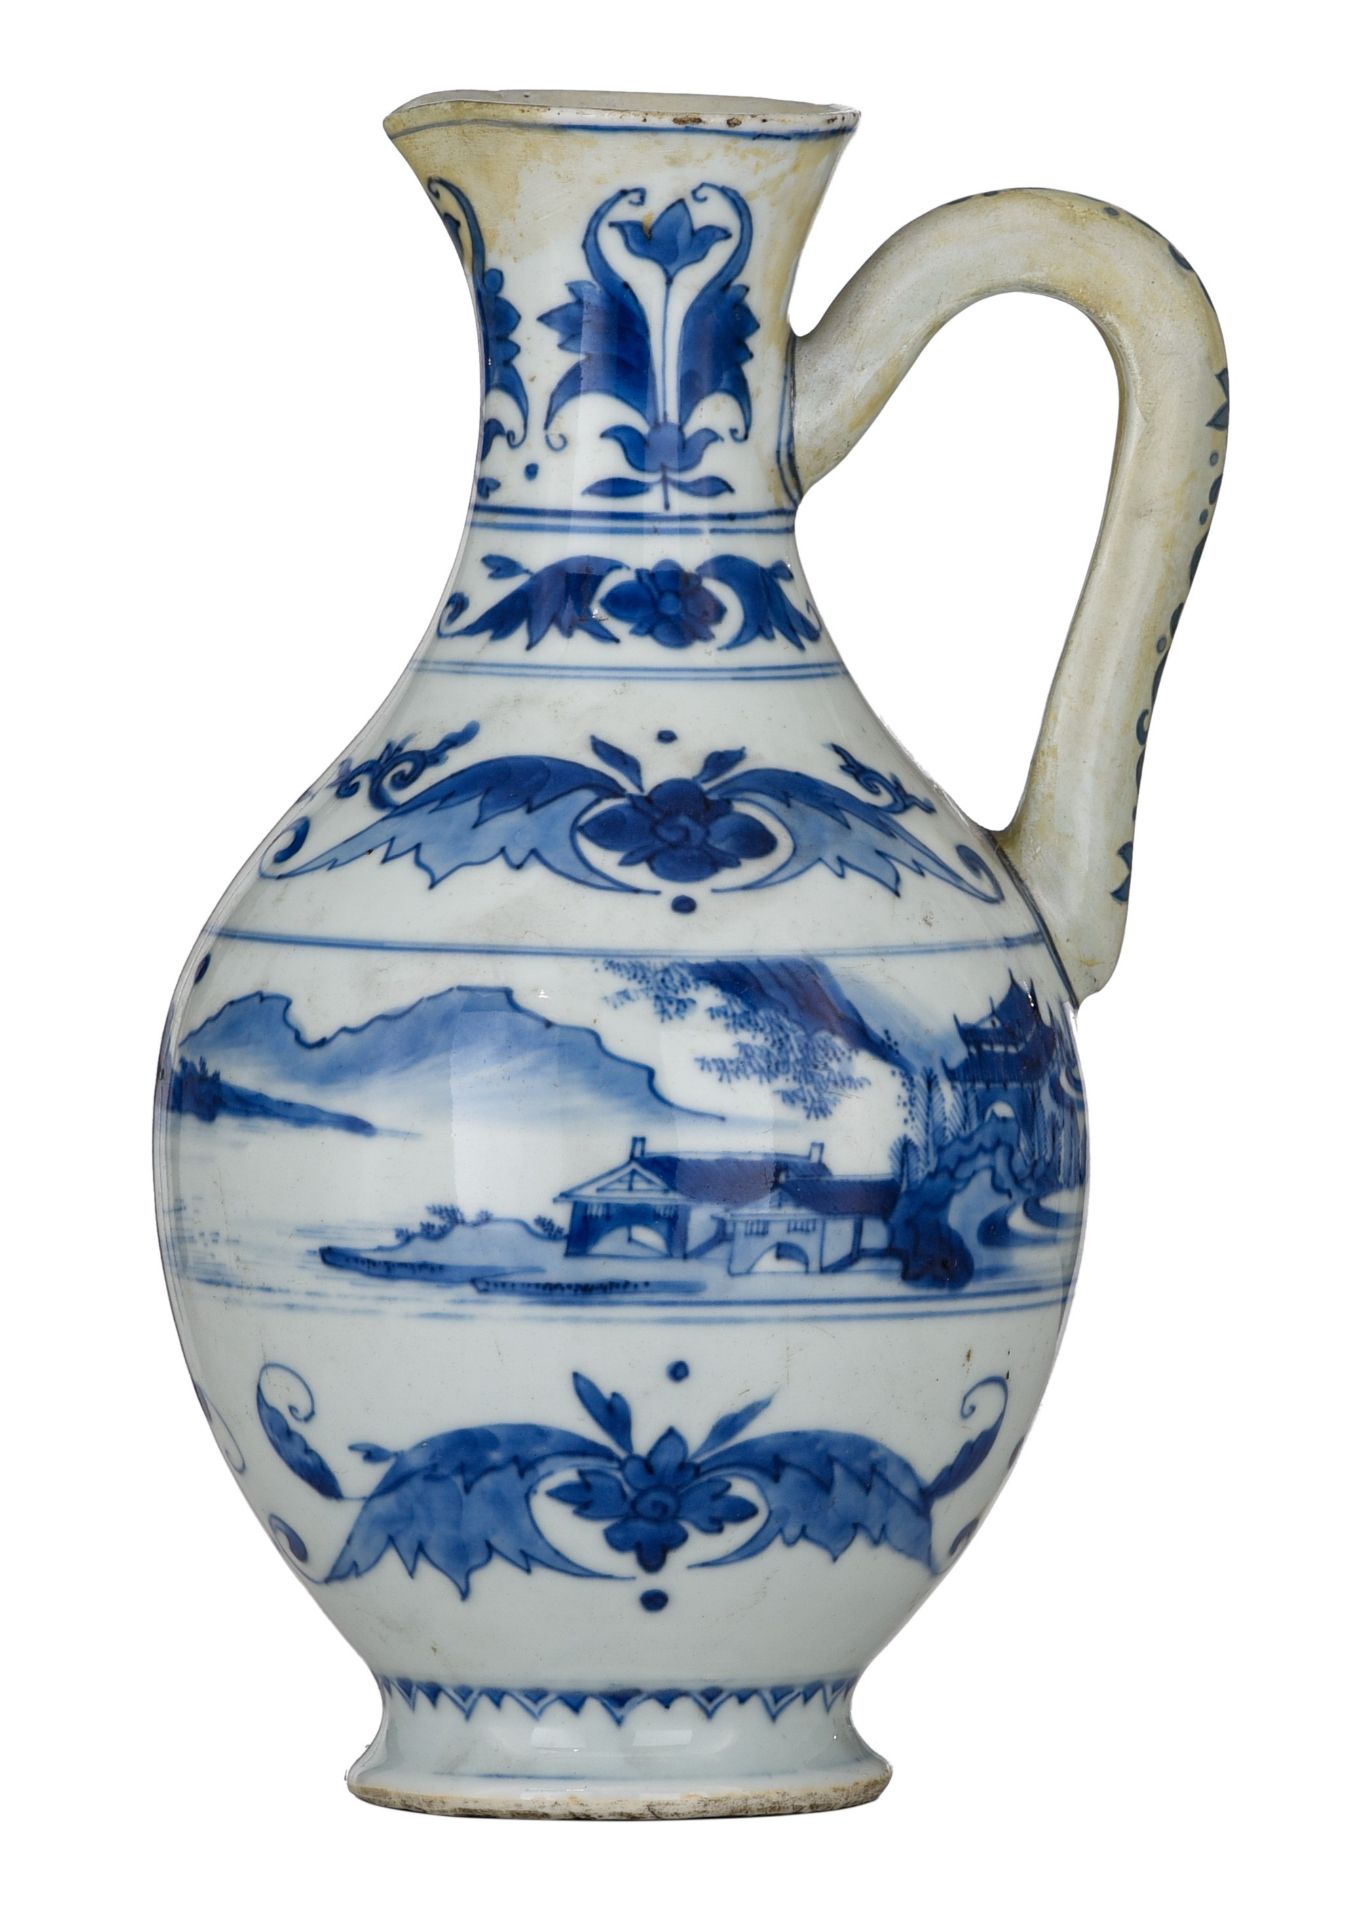 A Chinese blue and white jug, late 17thC/early 18thC, H 23,5 cm